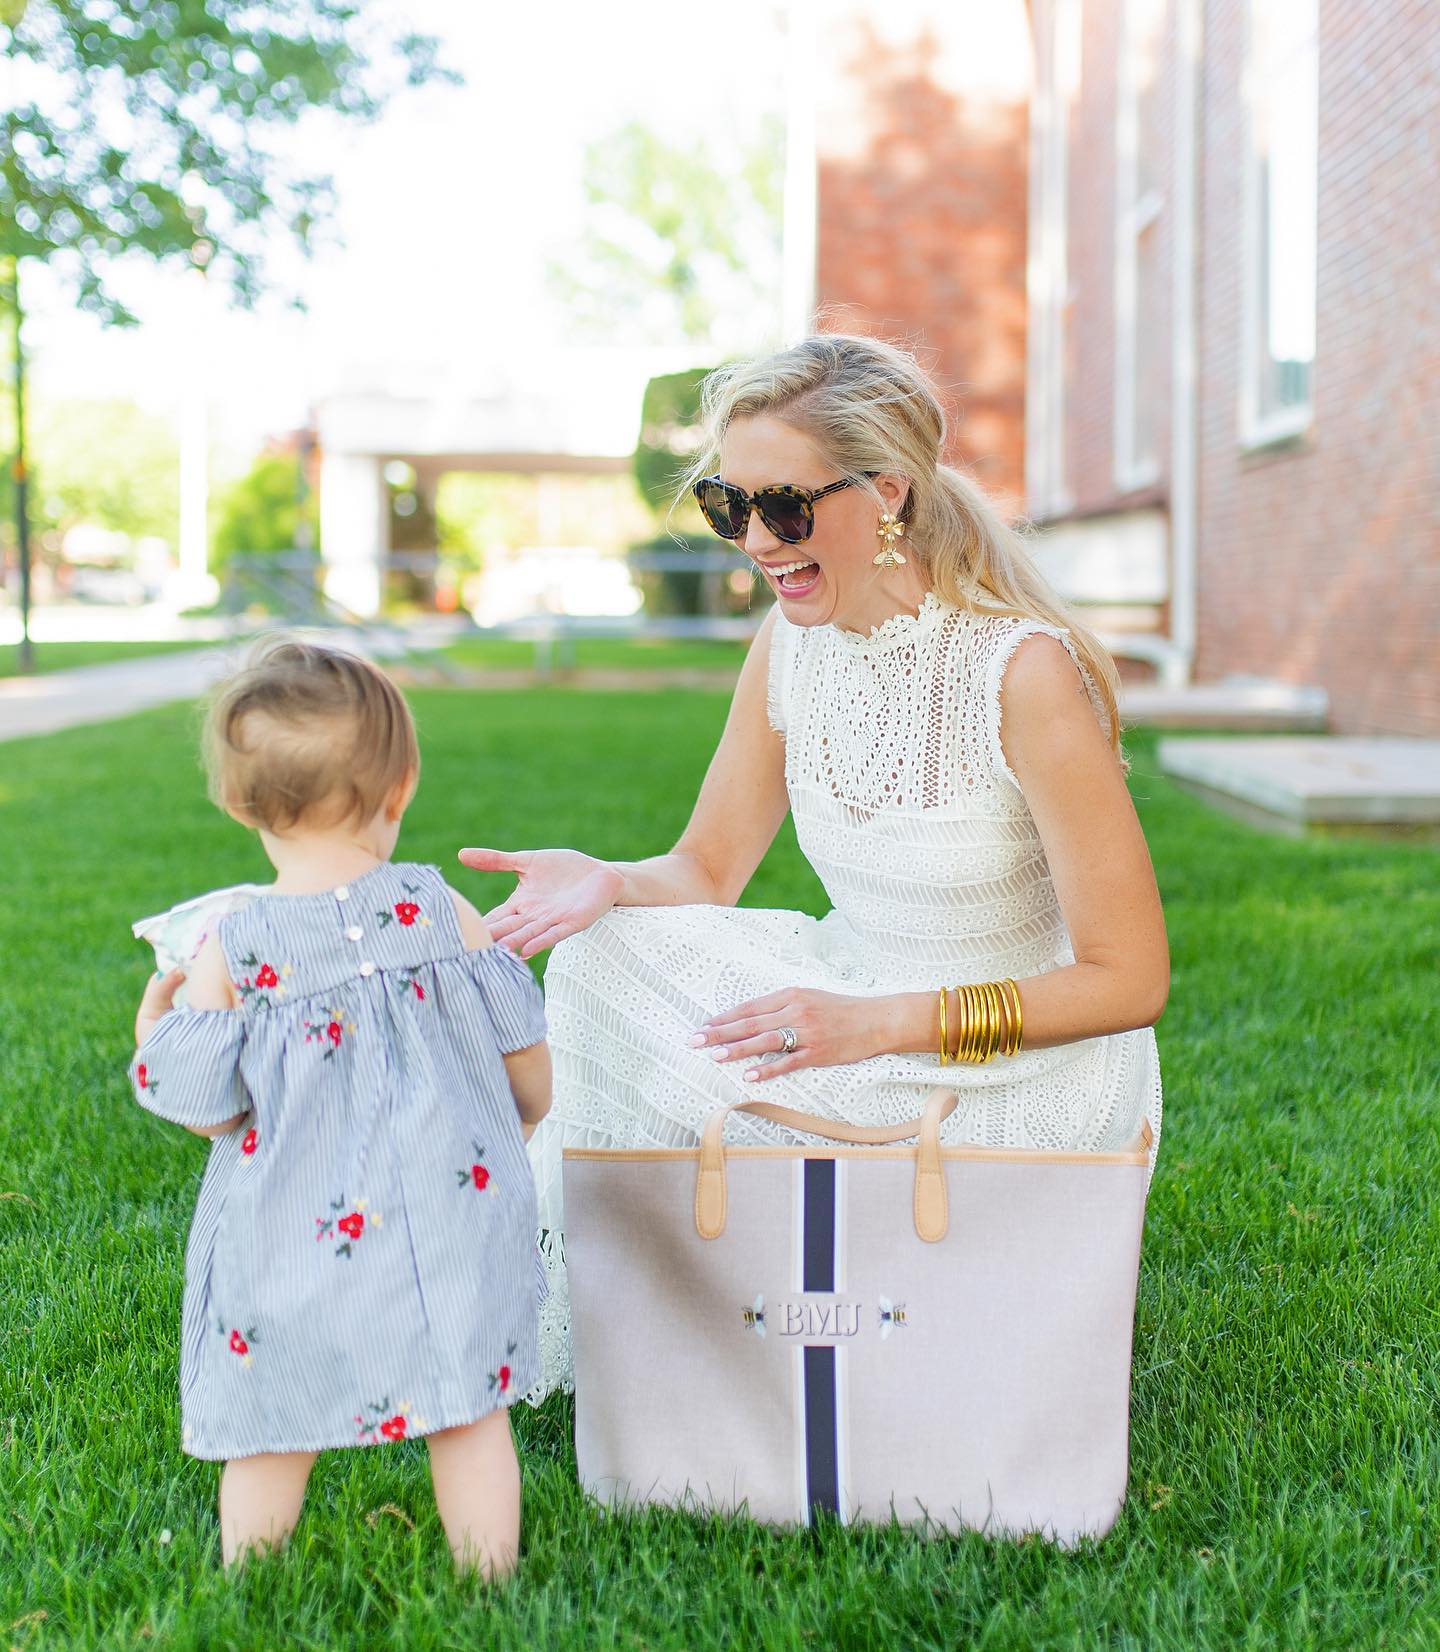 Monogram diaper bag with baby, a must-have for organized and fashionable moms